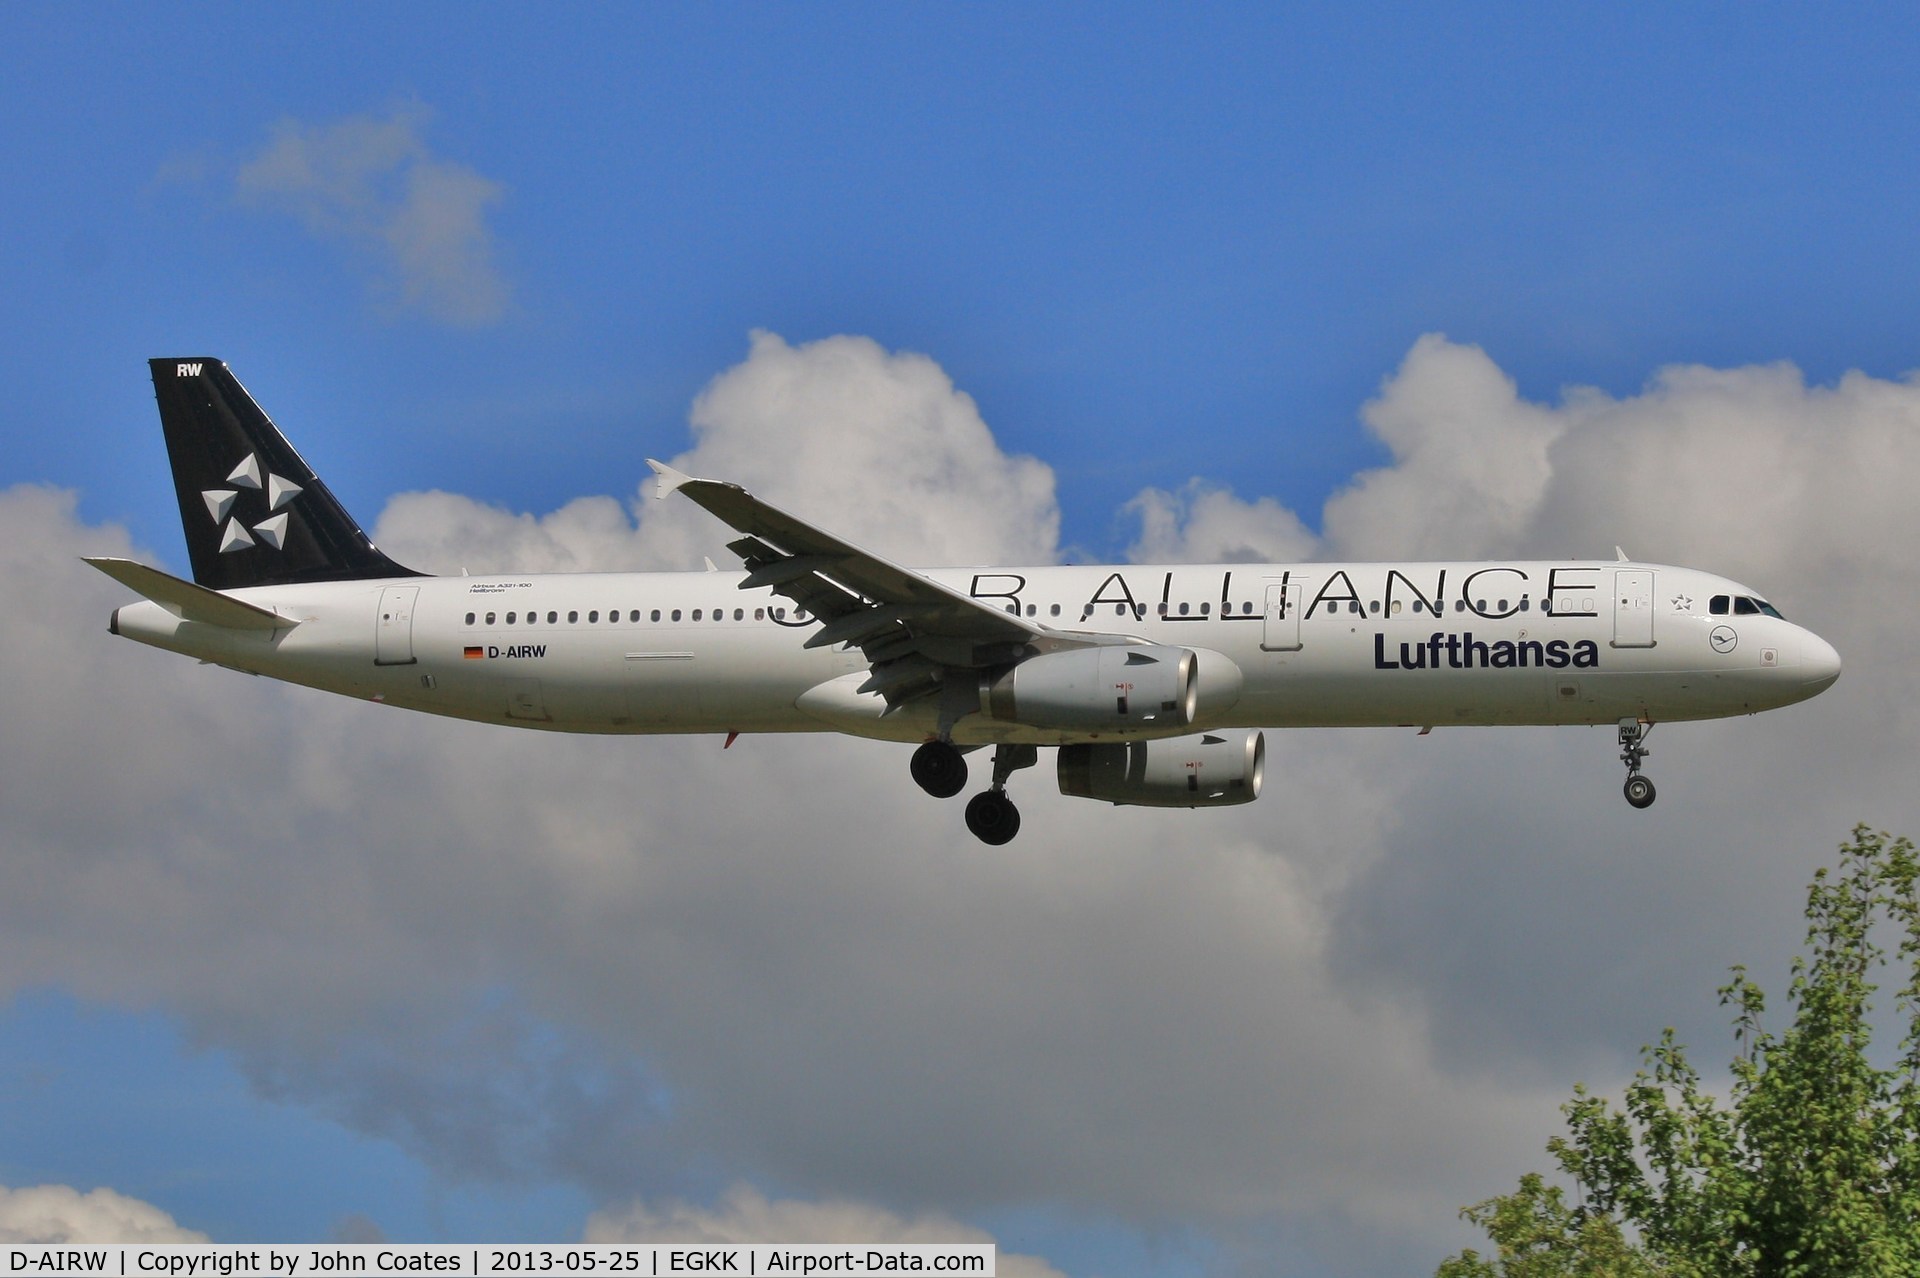 D-AIRW, 1997 Airbus A321-131 C/N 0699, Finals to 08R with more Munich fans